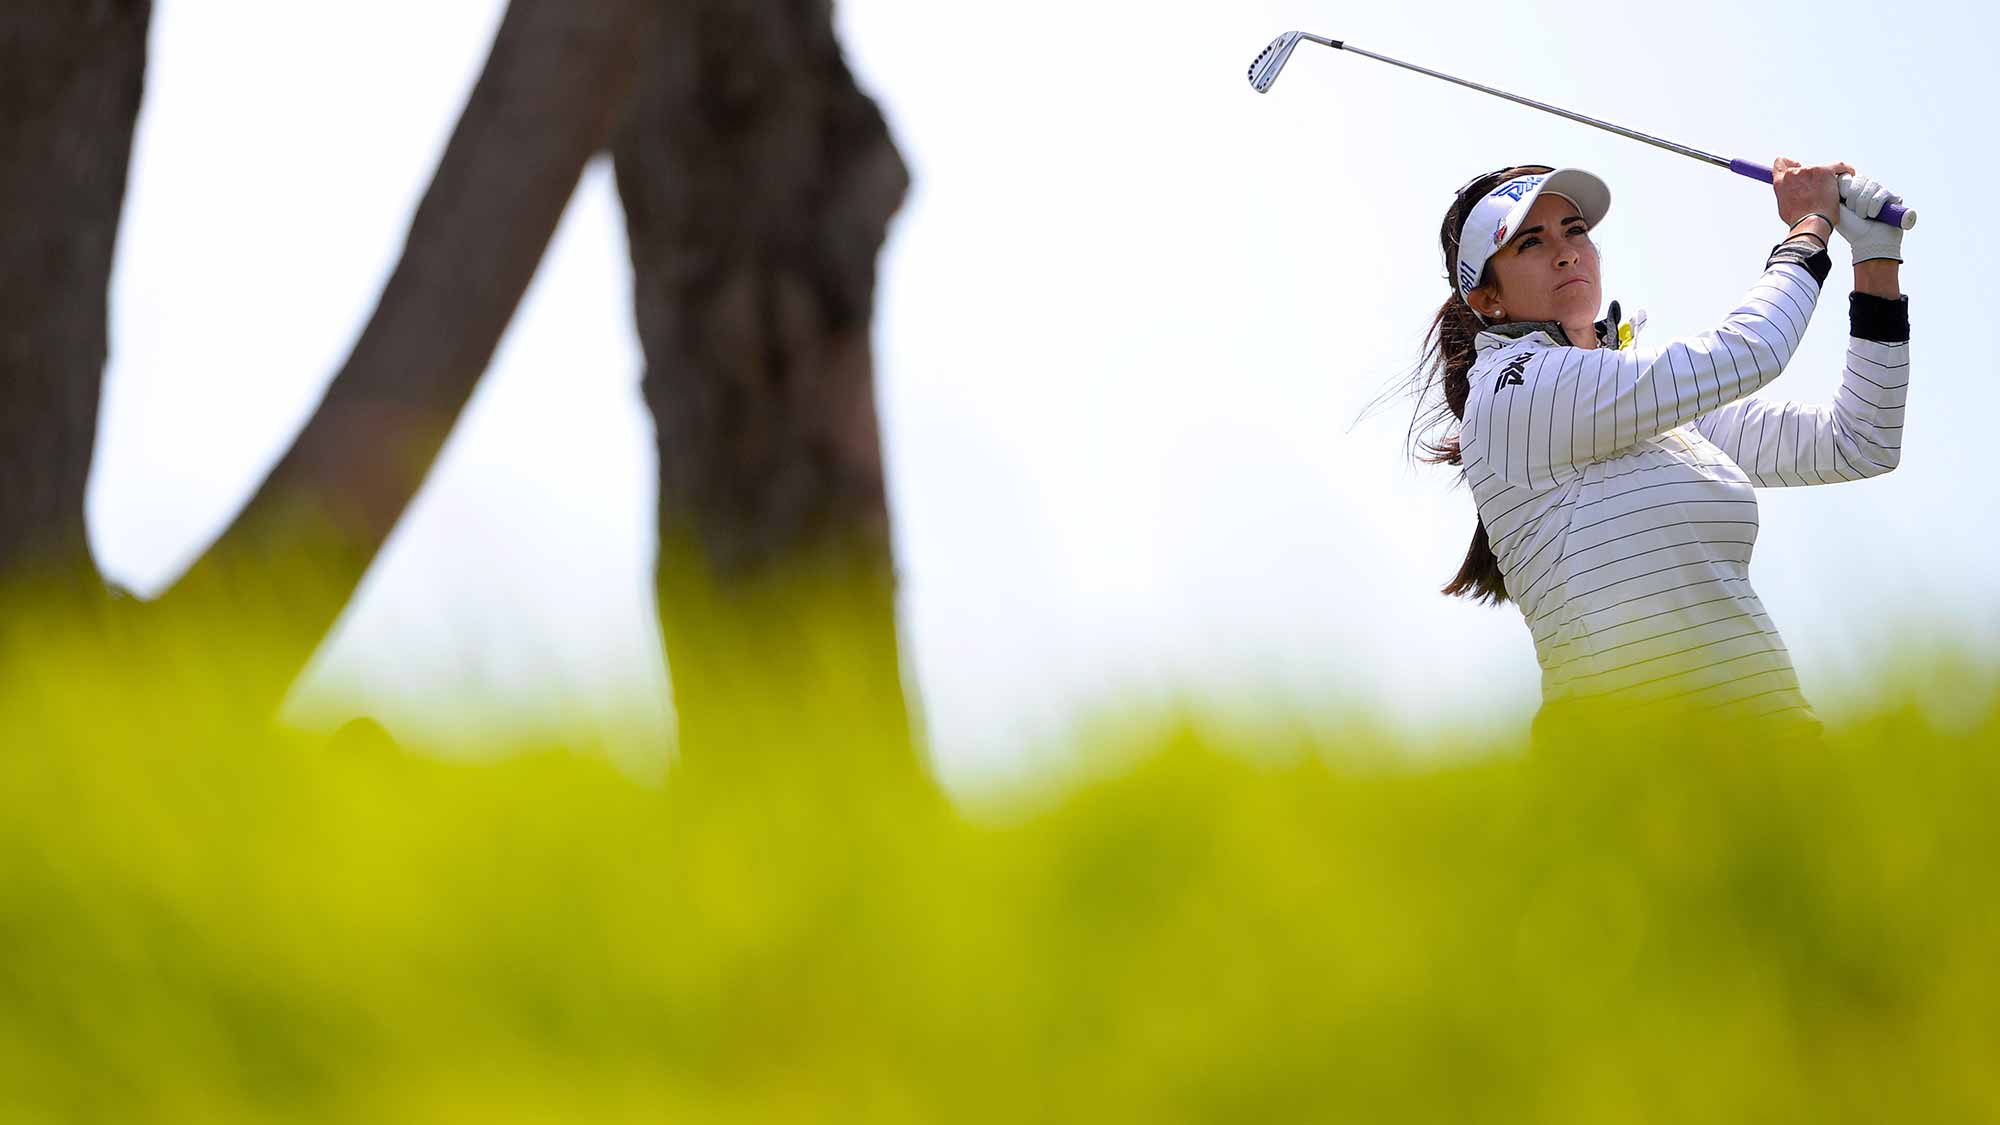 Gerina Piller makes a tee shot on the third hole during the final round of the Swinging Skirts LPGA Classic presented by CTBC at the Lake Merced Golf Club 